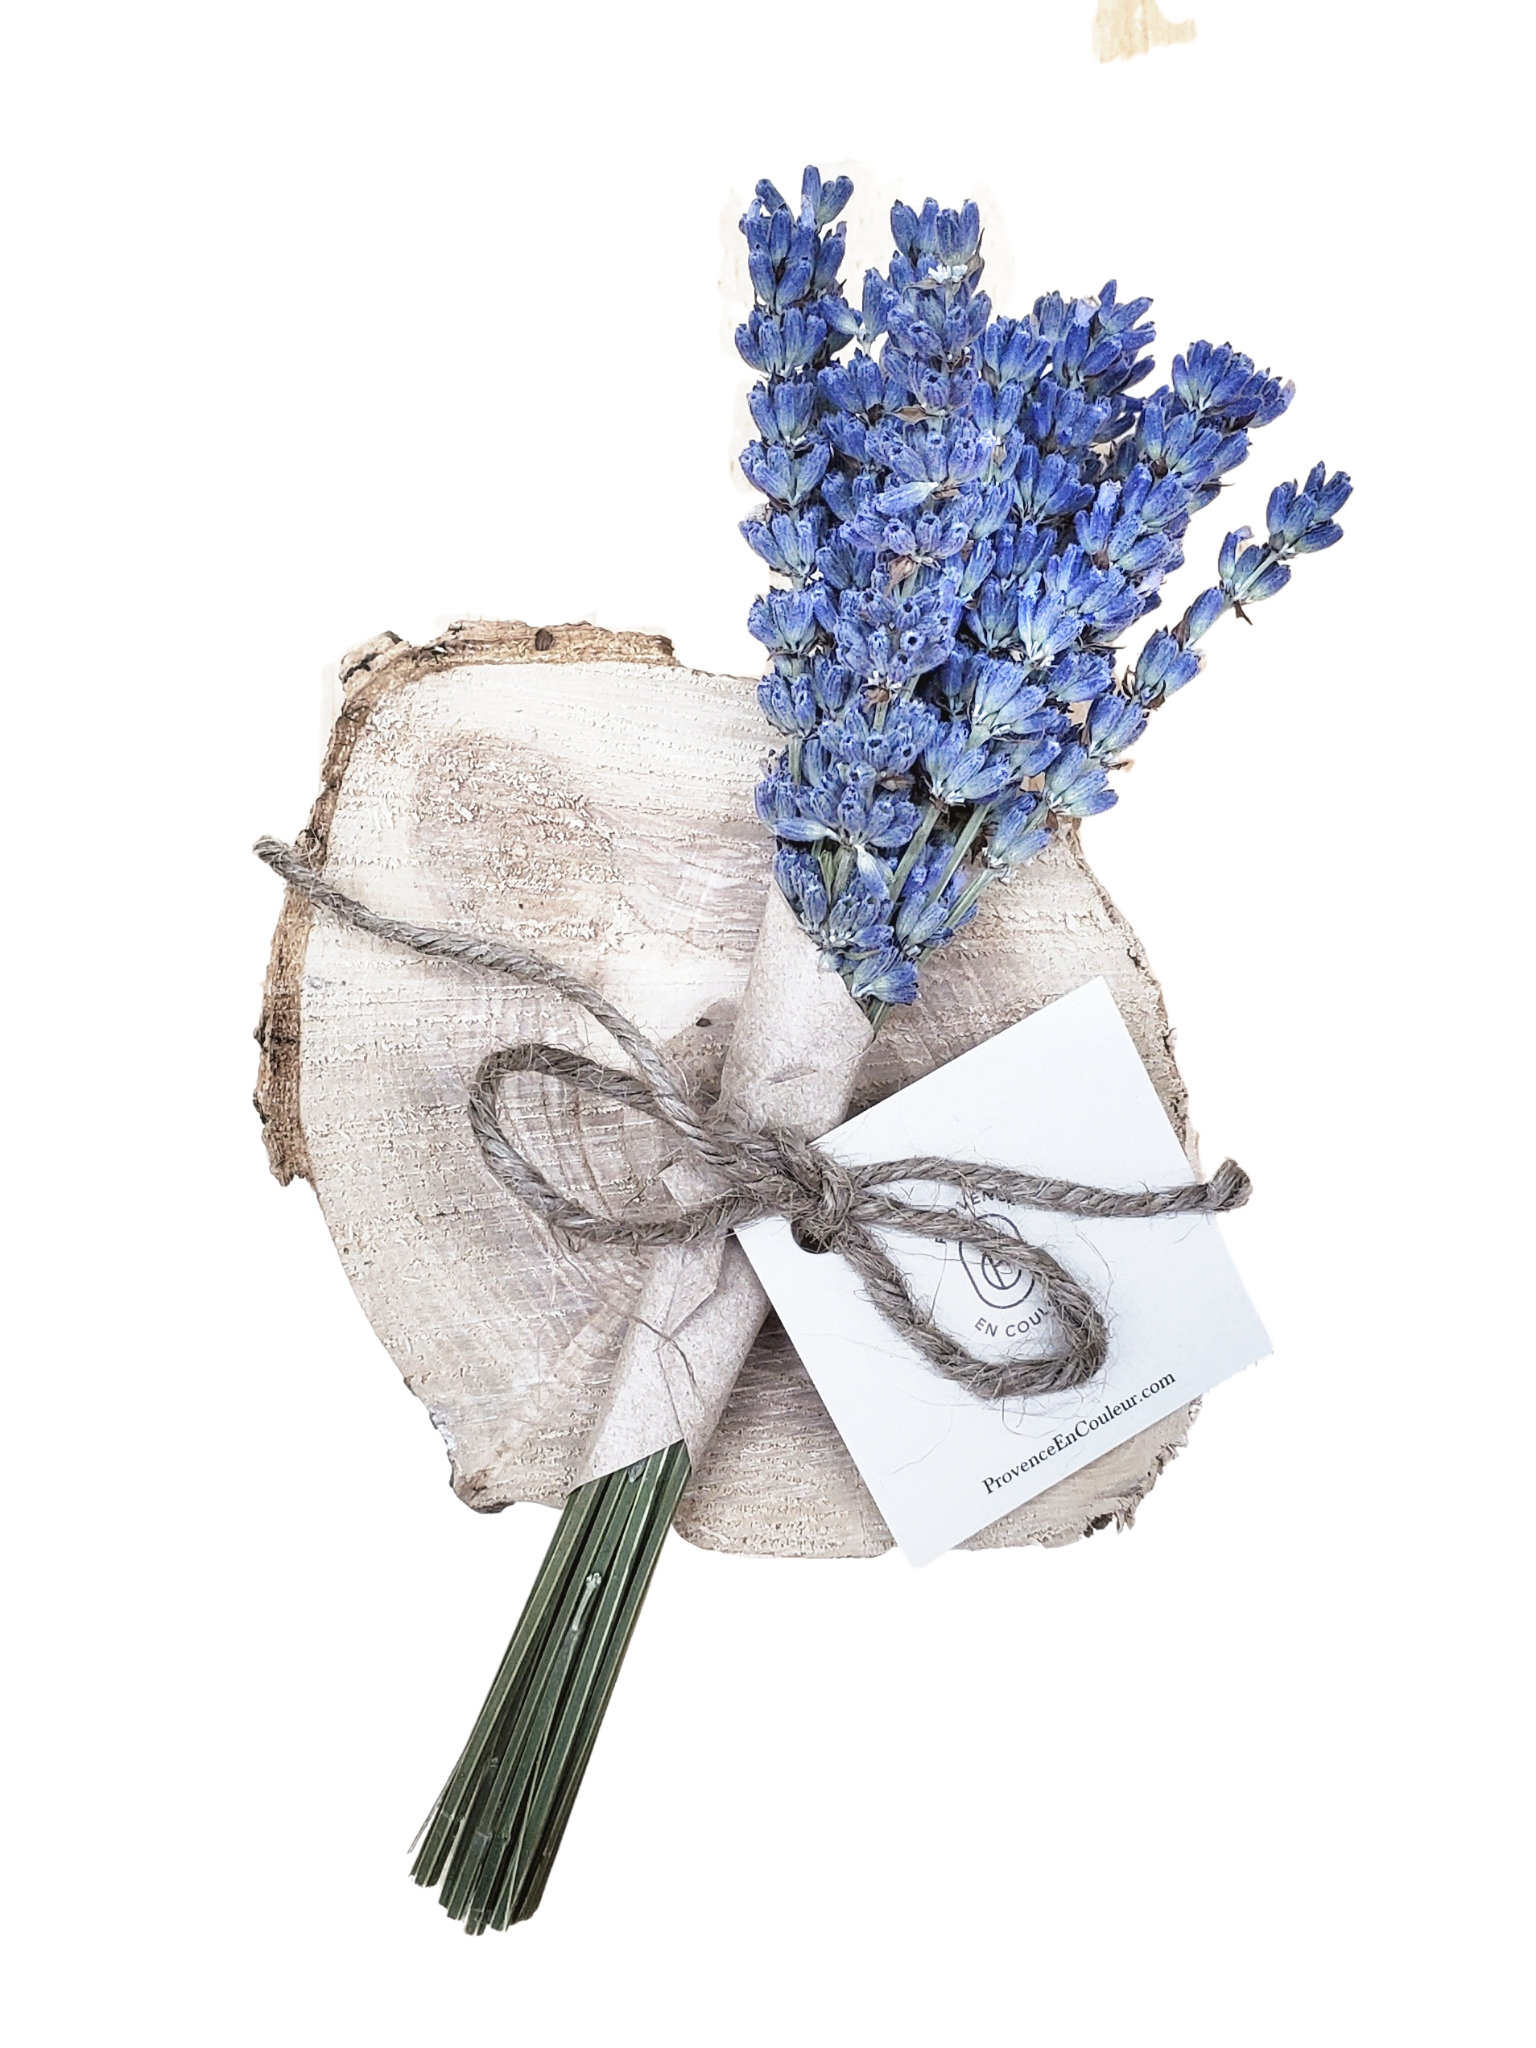 A handmade lavender bouquets bring a breath of Provence right to your home. This traditional dried lavender bouquet adds a refreshing touch to your decoration.   Expert Tip: Avoid displaying in direct sunlight and keep away from water.